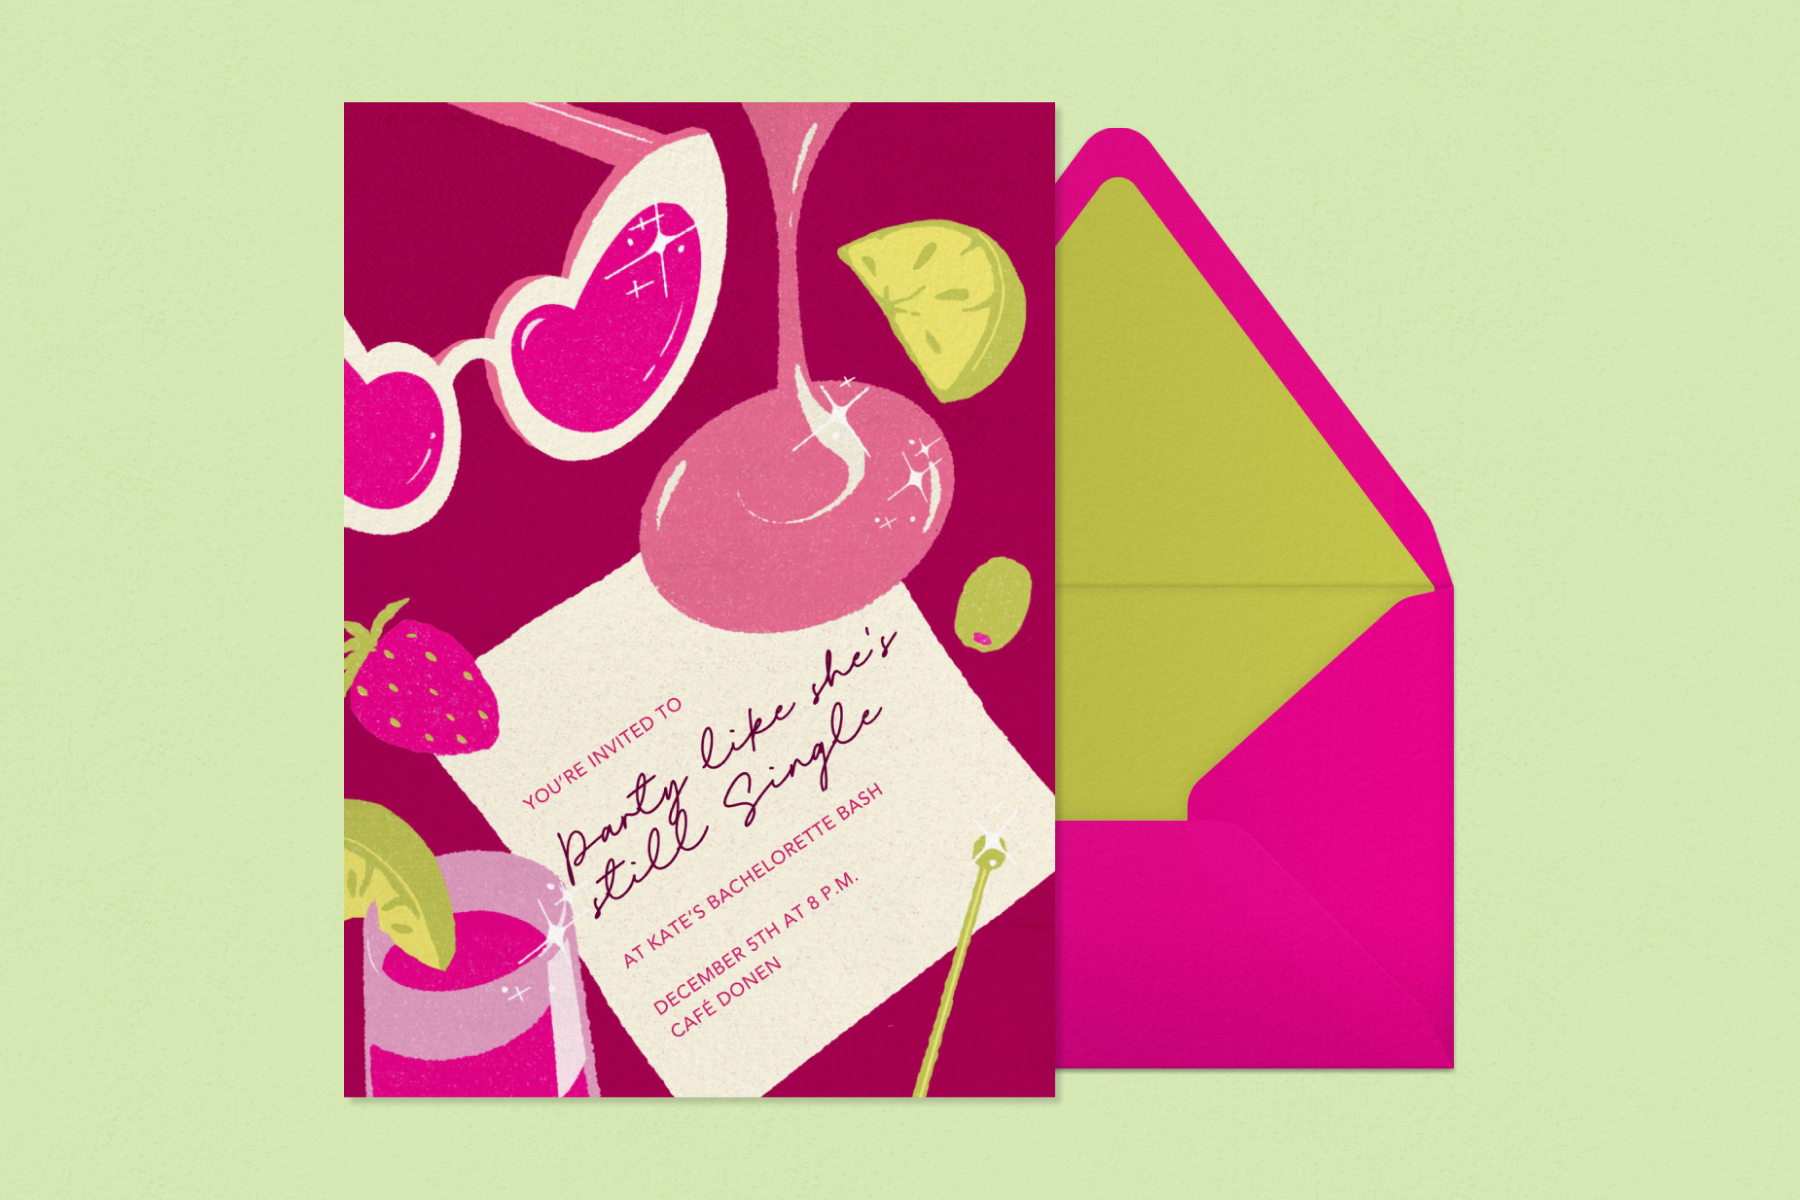 A pink invitation with heart-shaped sunglasses, a drink, strawberry, glass stem, garnishes, and cocktail napkin beside a pink and green envelope.